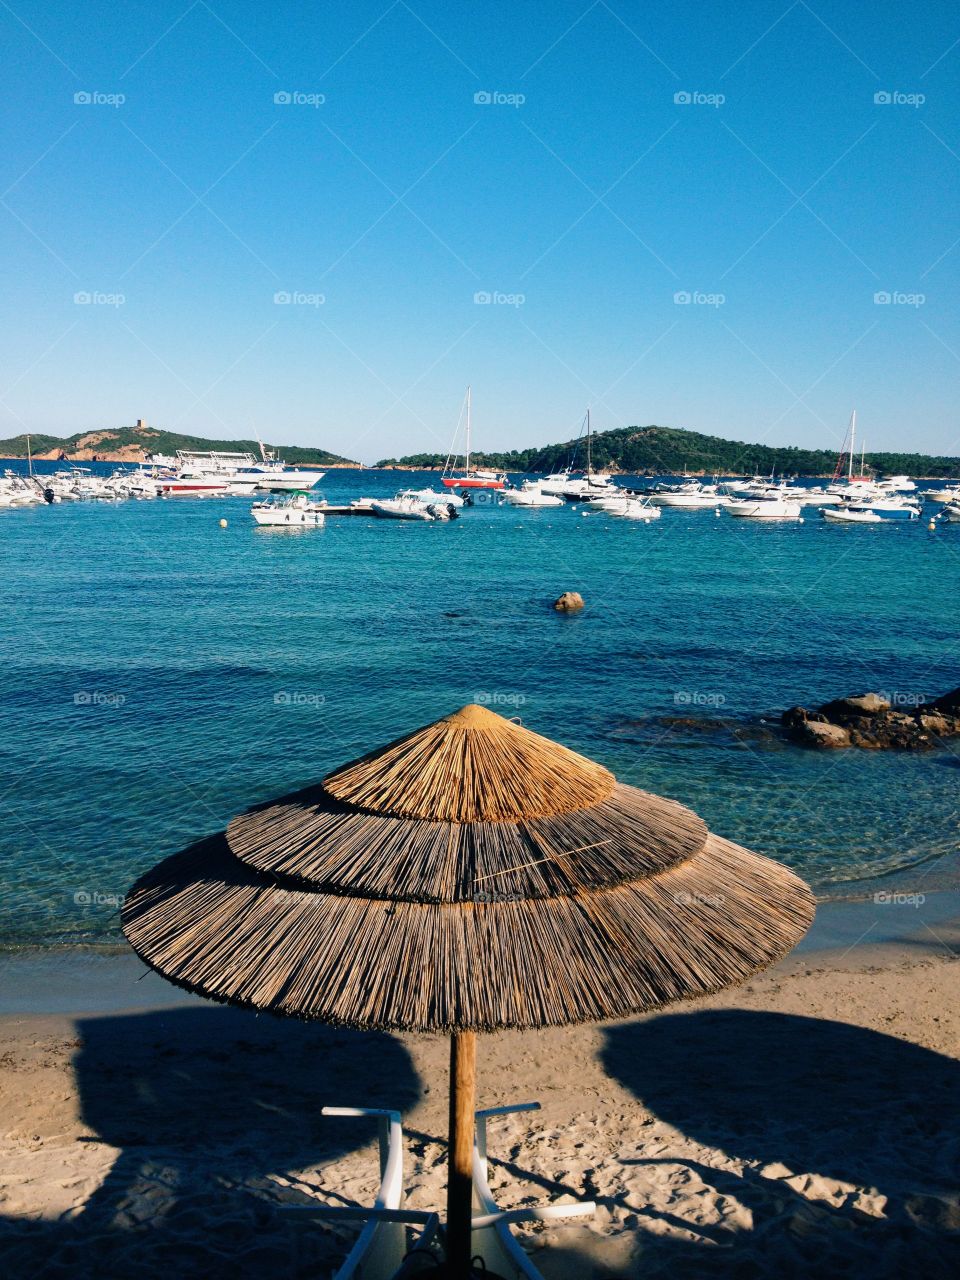 Thatch roof umbrella on a beach in Corsica 